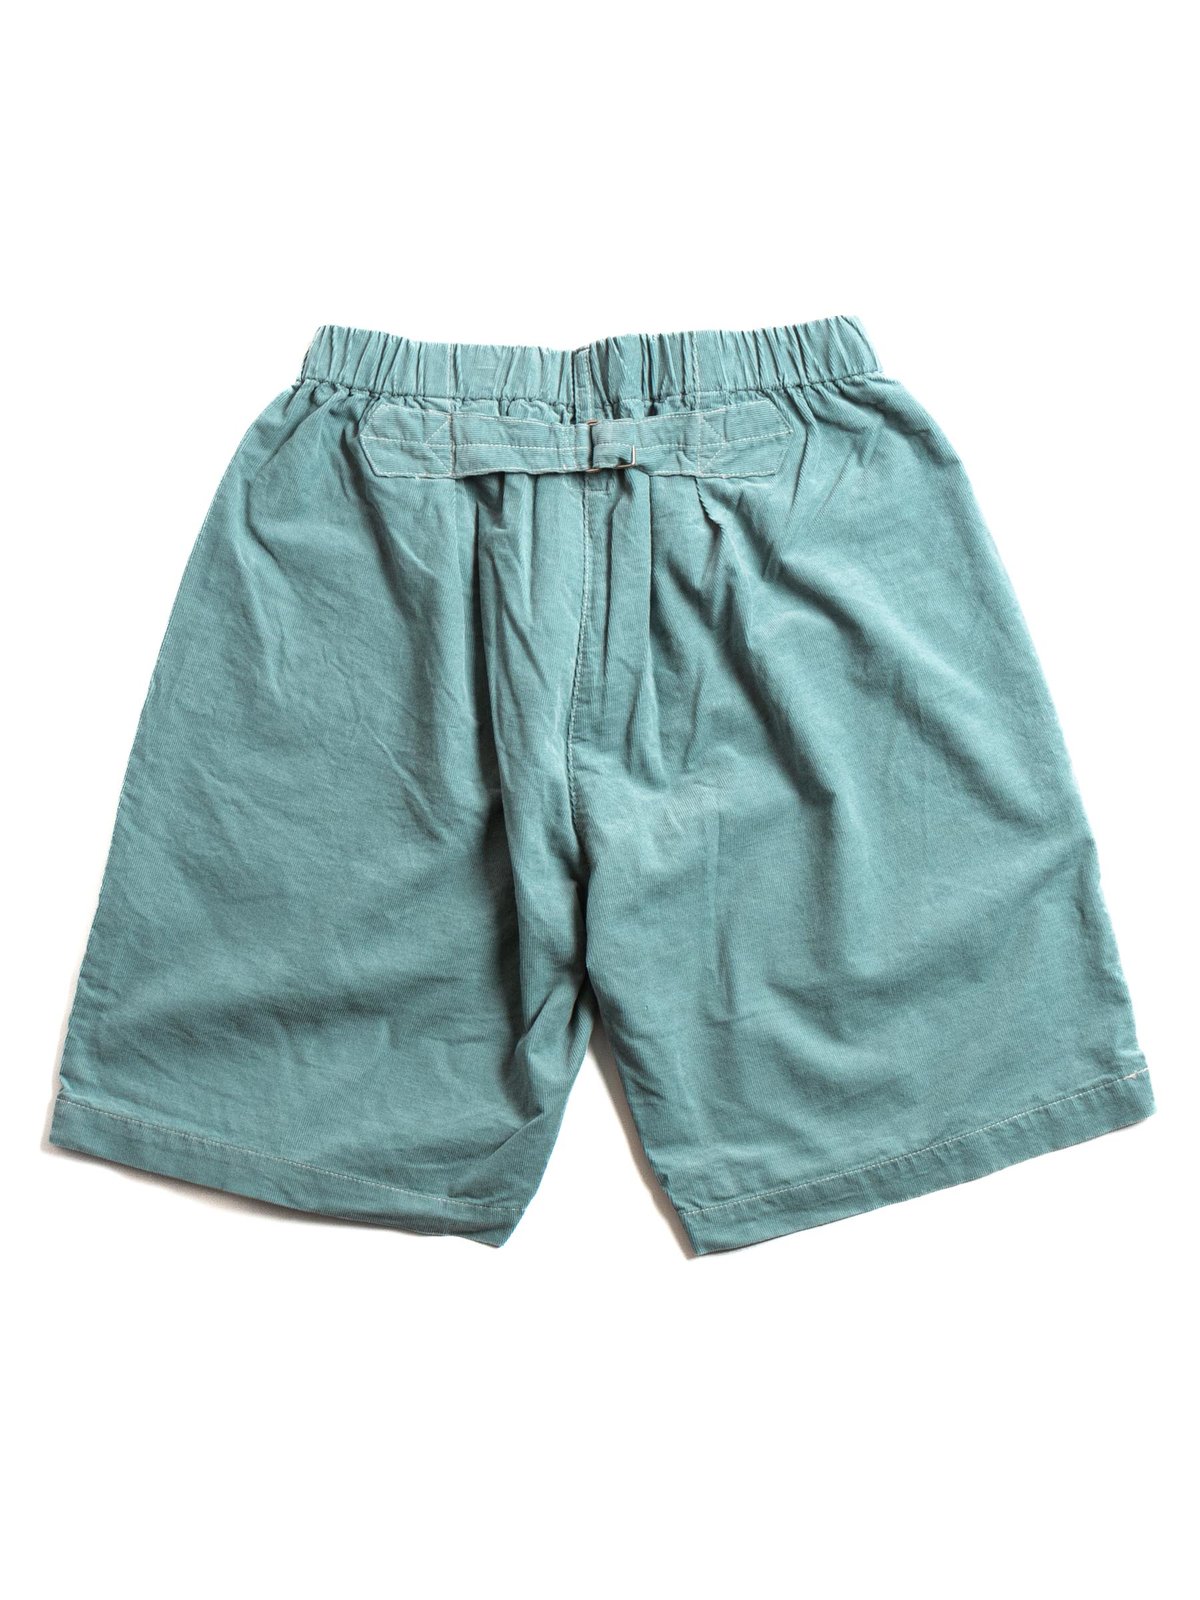 E–Z LAX 4 SHORTS SUMMER CORDS MUSCAT GREEN - Image 5